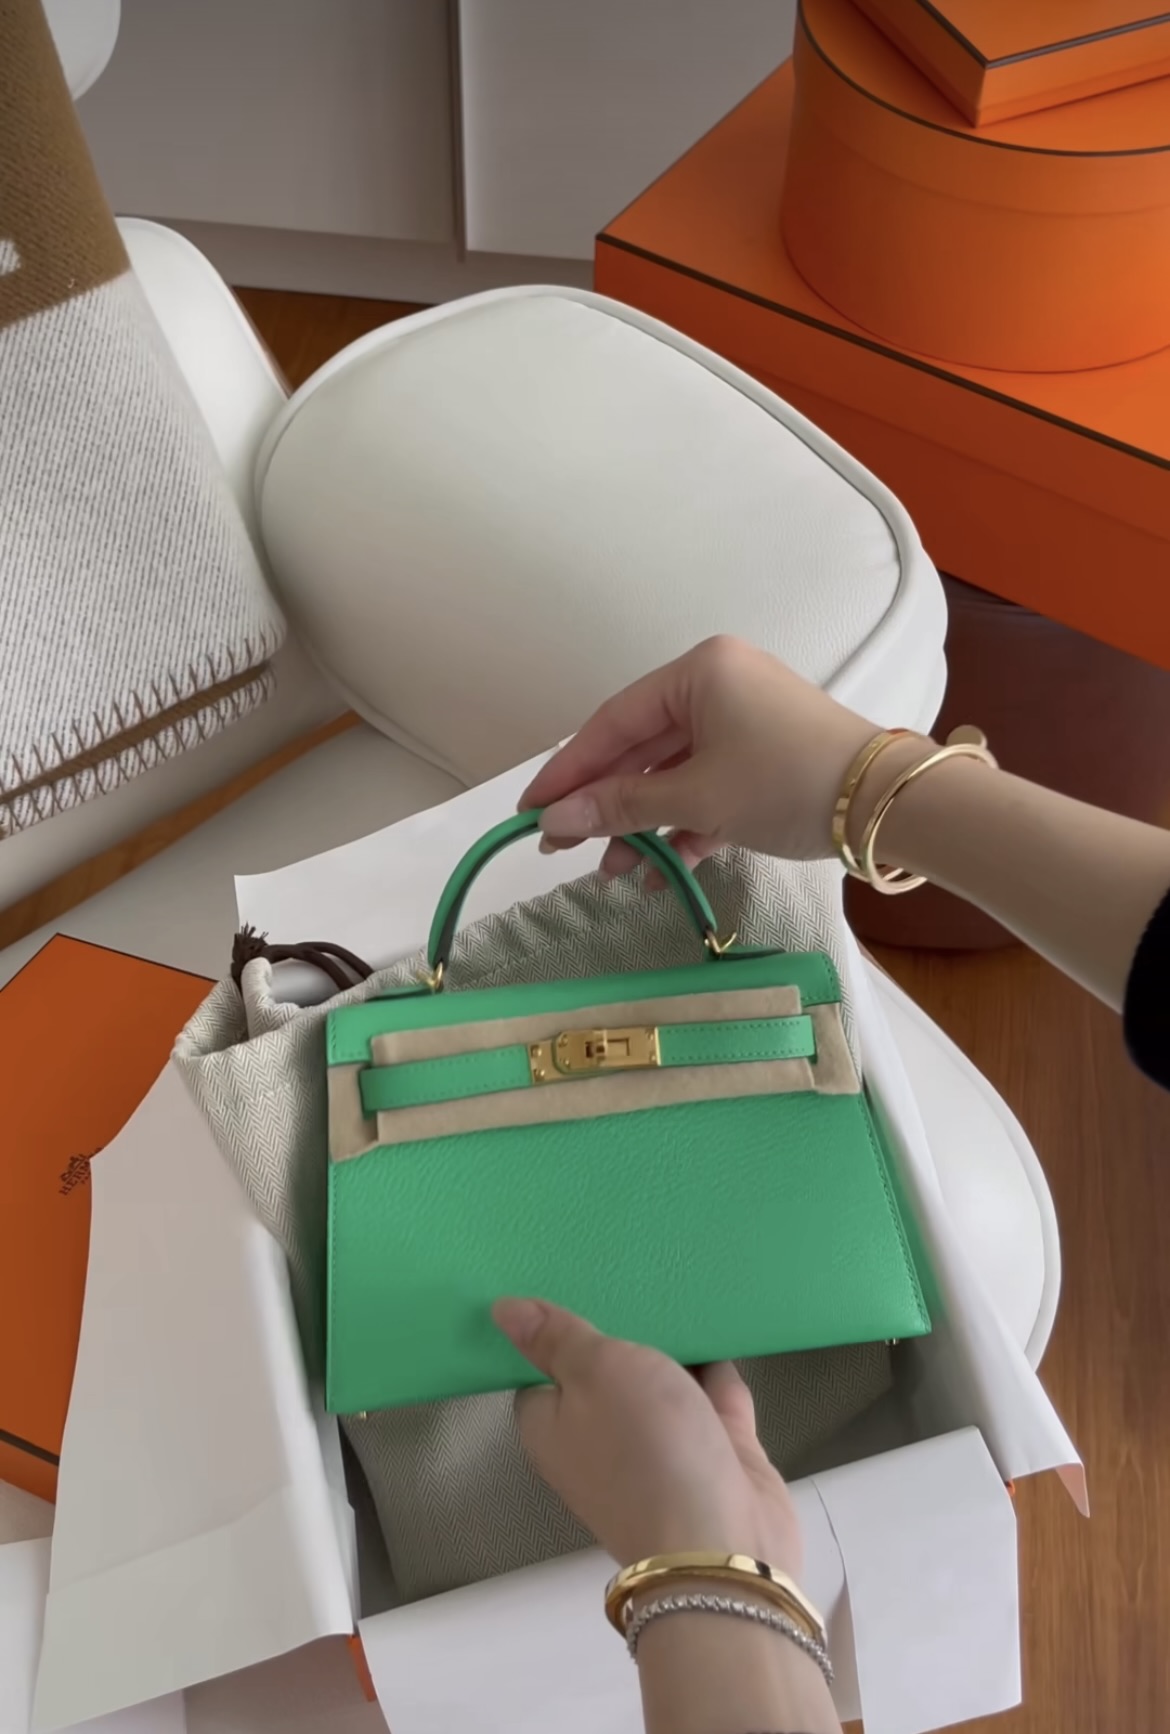 Dear PurseBop: How Specific Should I Be When Requesting an Hermès